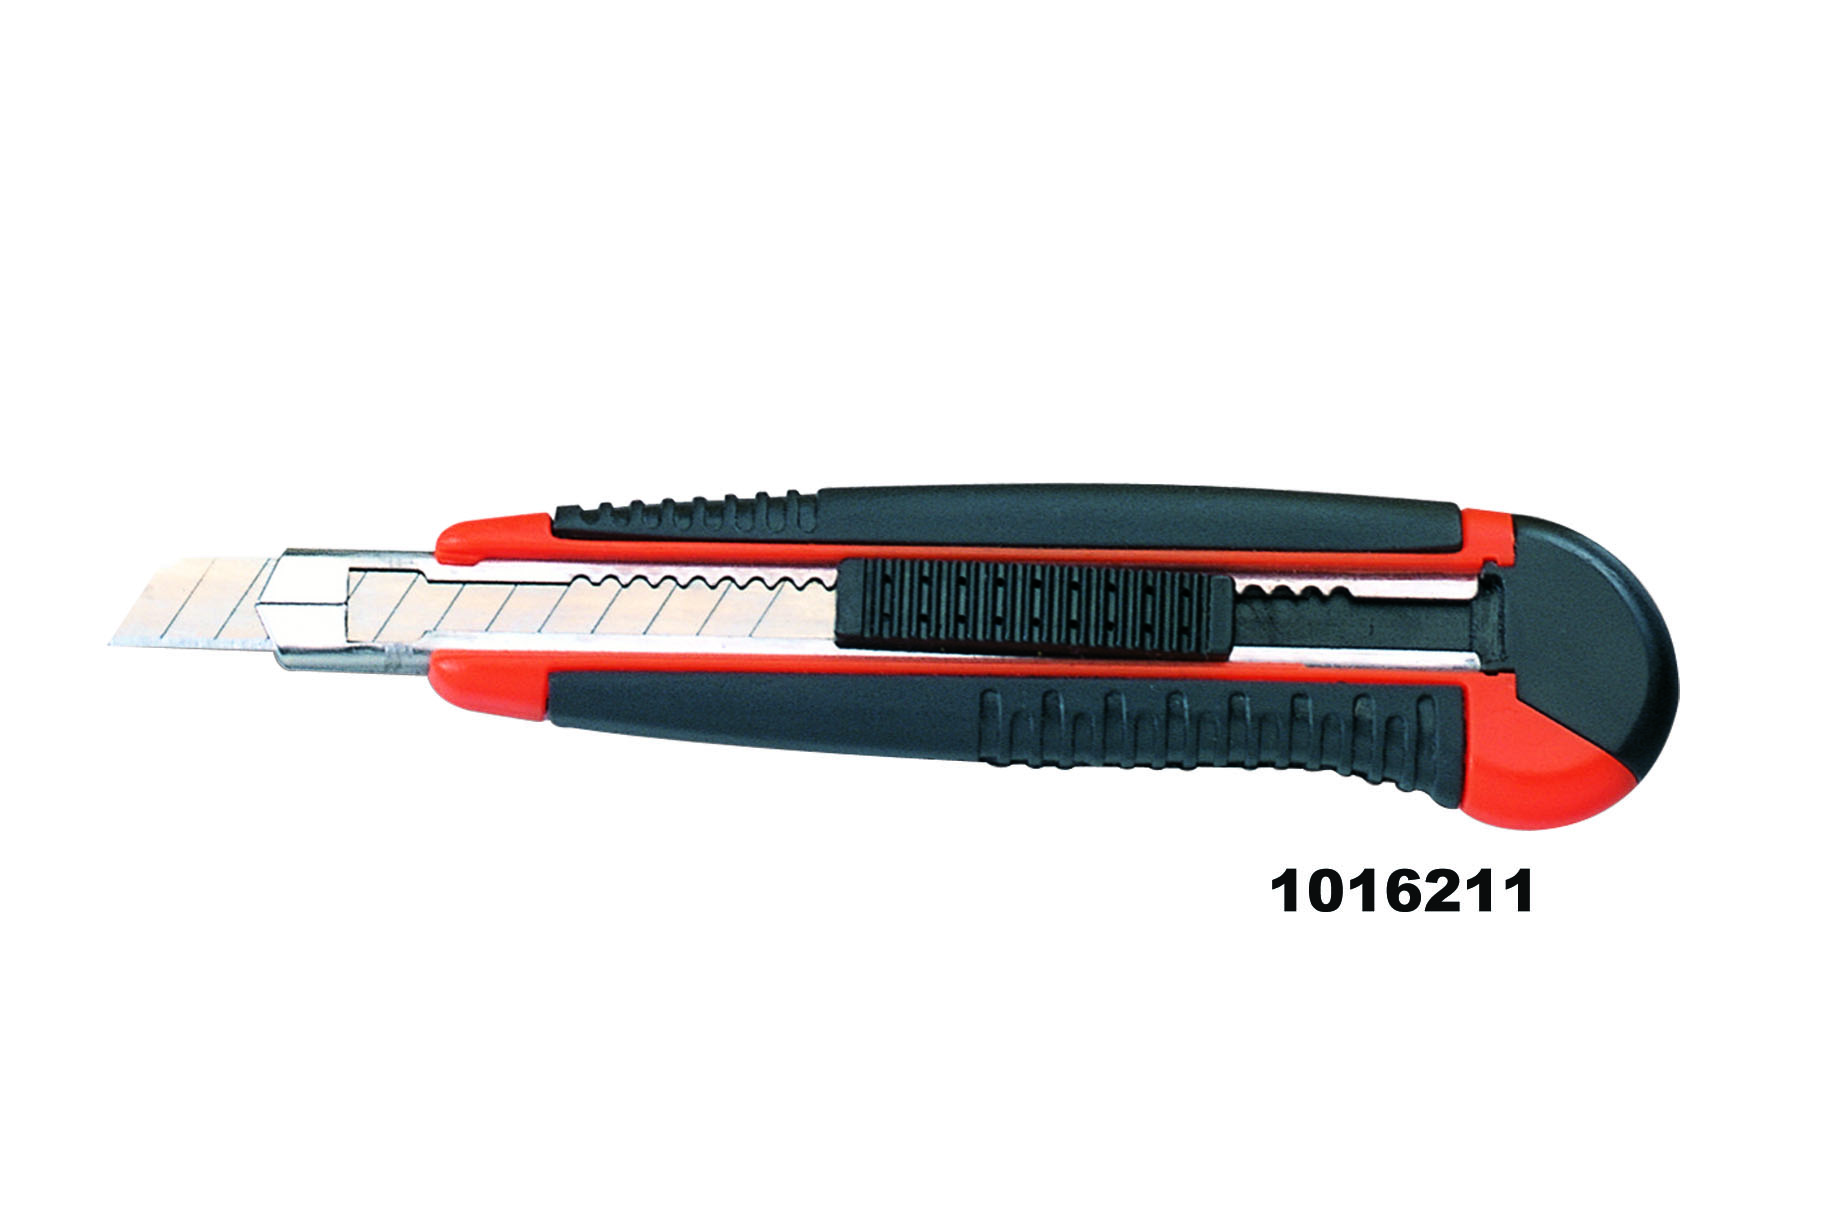 Heavy-duty cutters with rubber grip